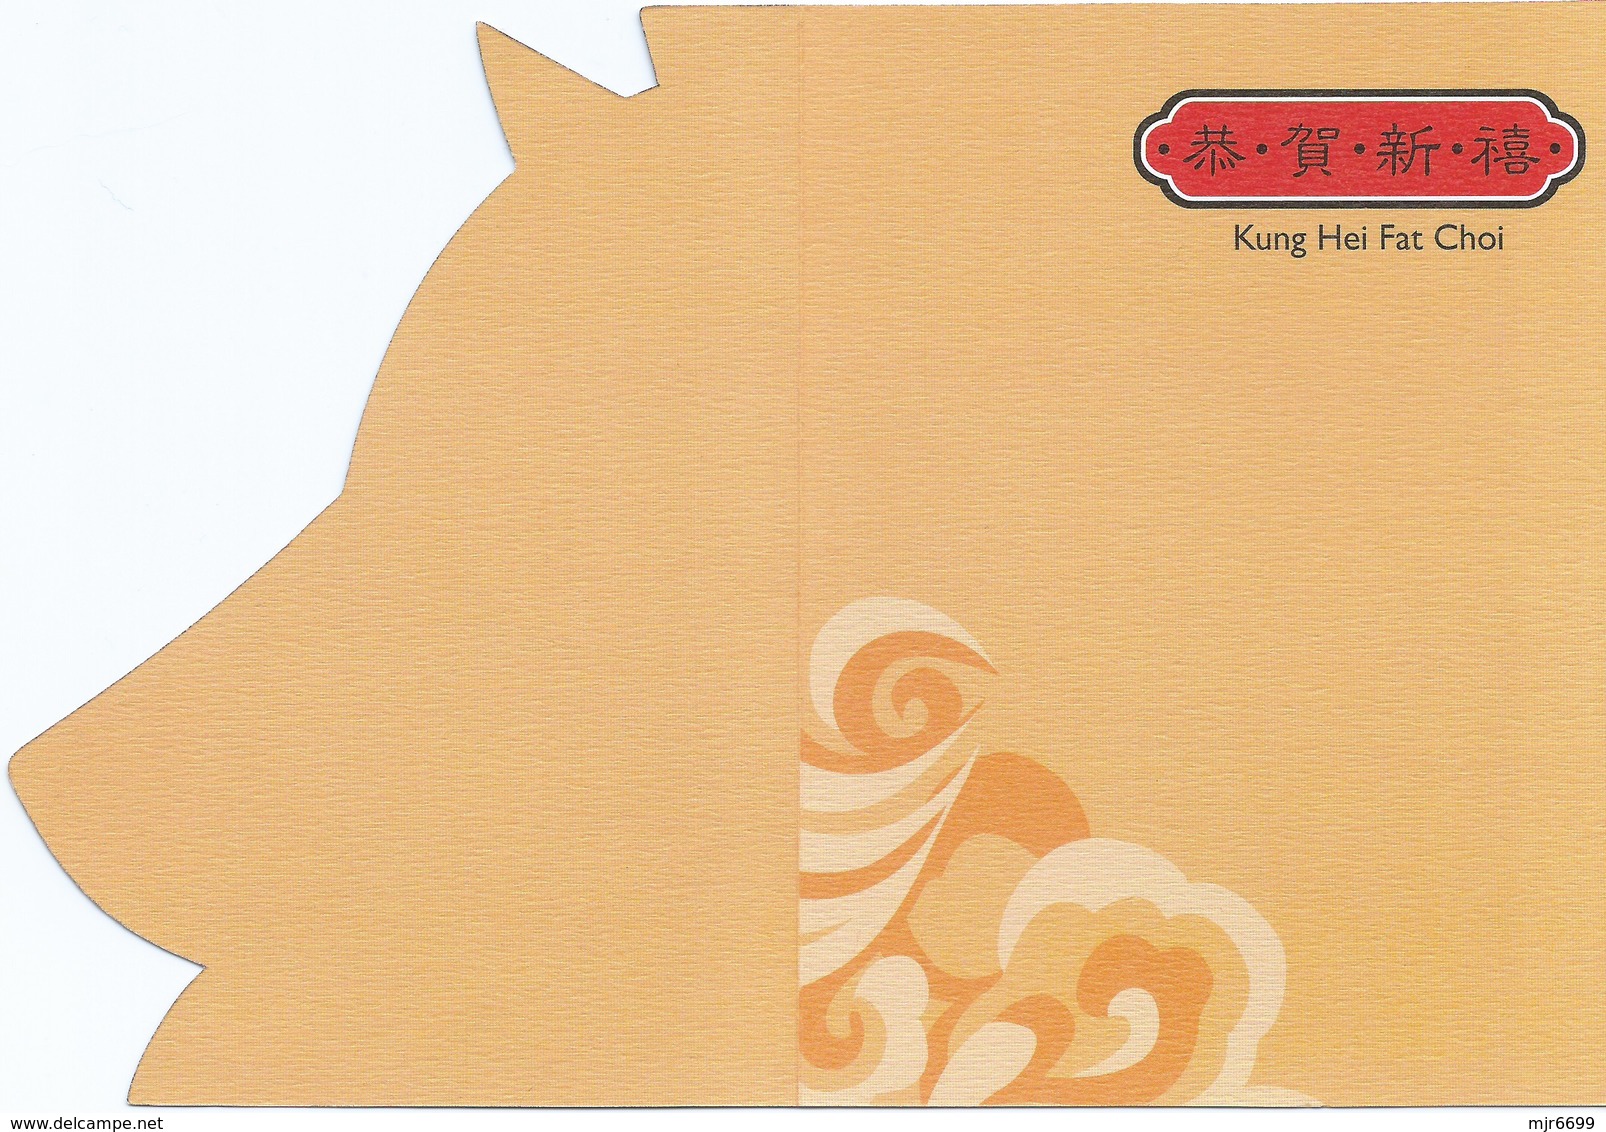 MACAU 2005 LUNAR YEAR OF THE DOG GREETING CARD & POSTAGE PAID COVER FIRST DAY USAGE WITH COLOANE POST CDS - Enteros Postales